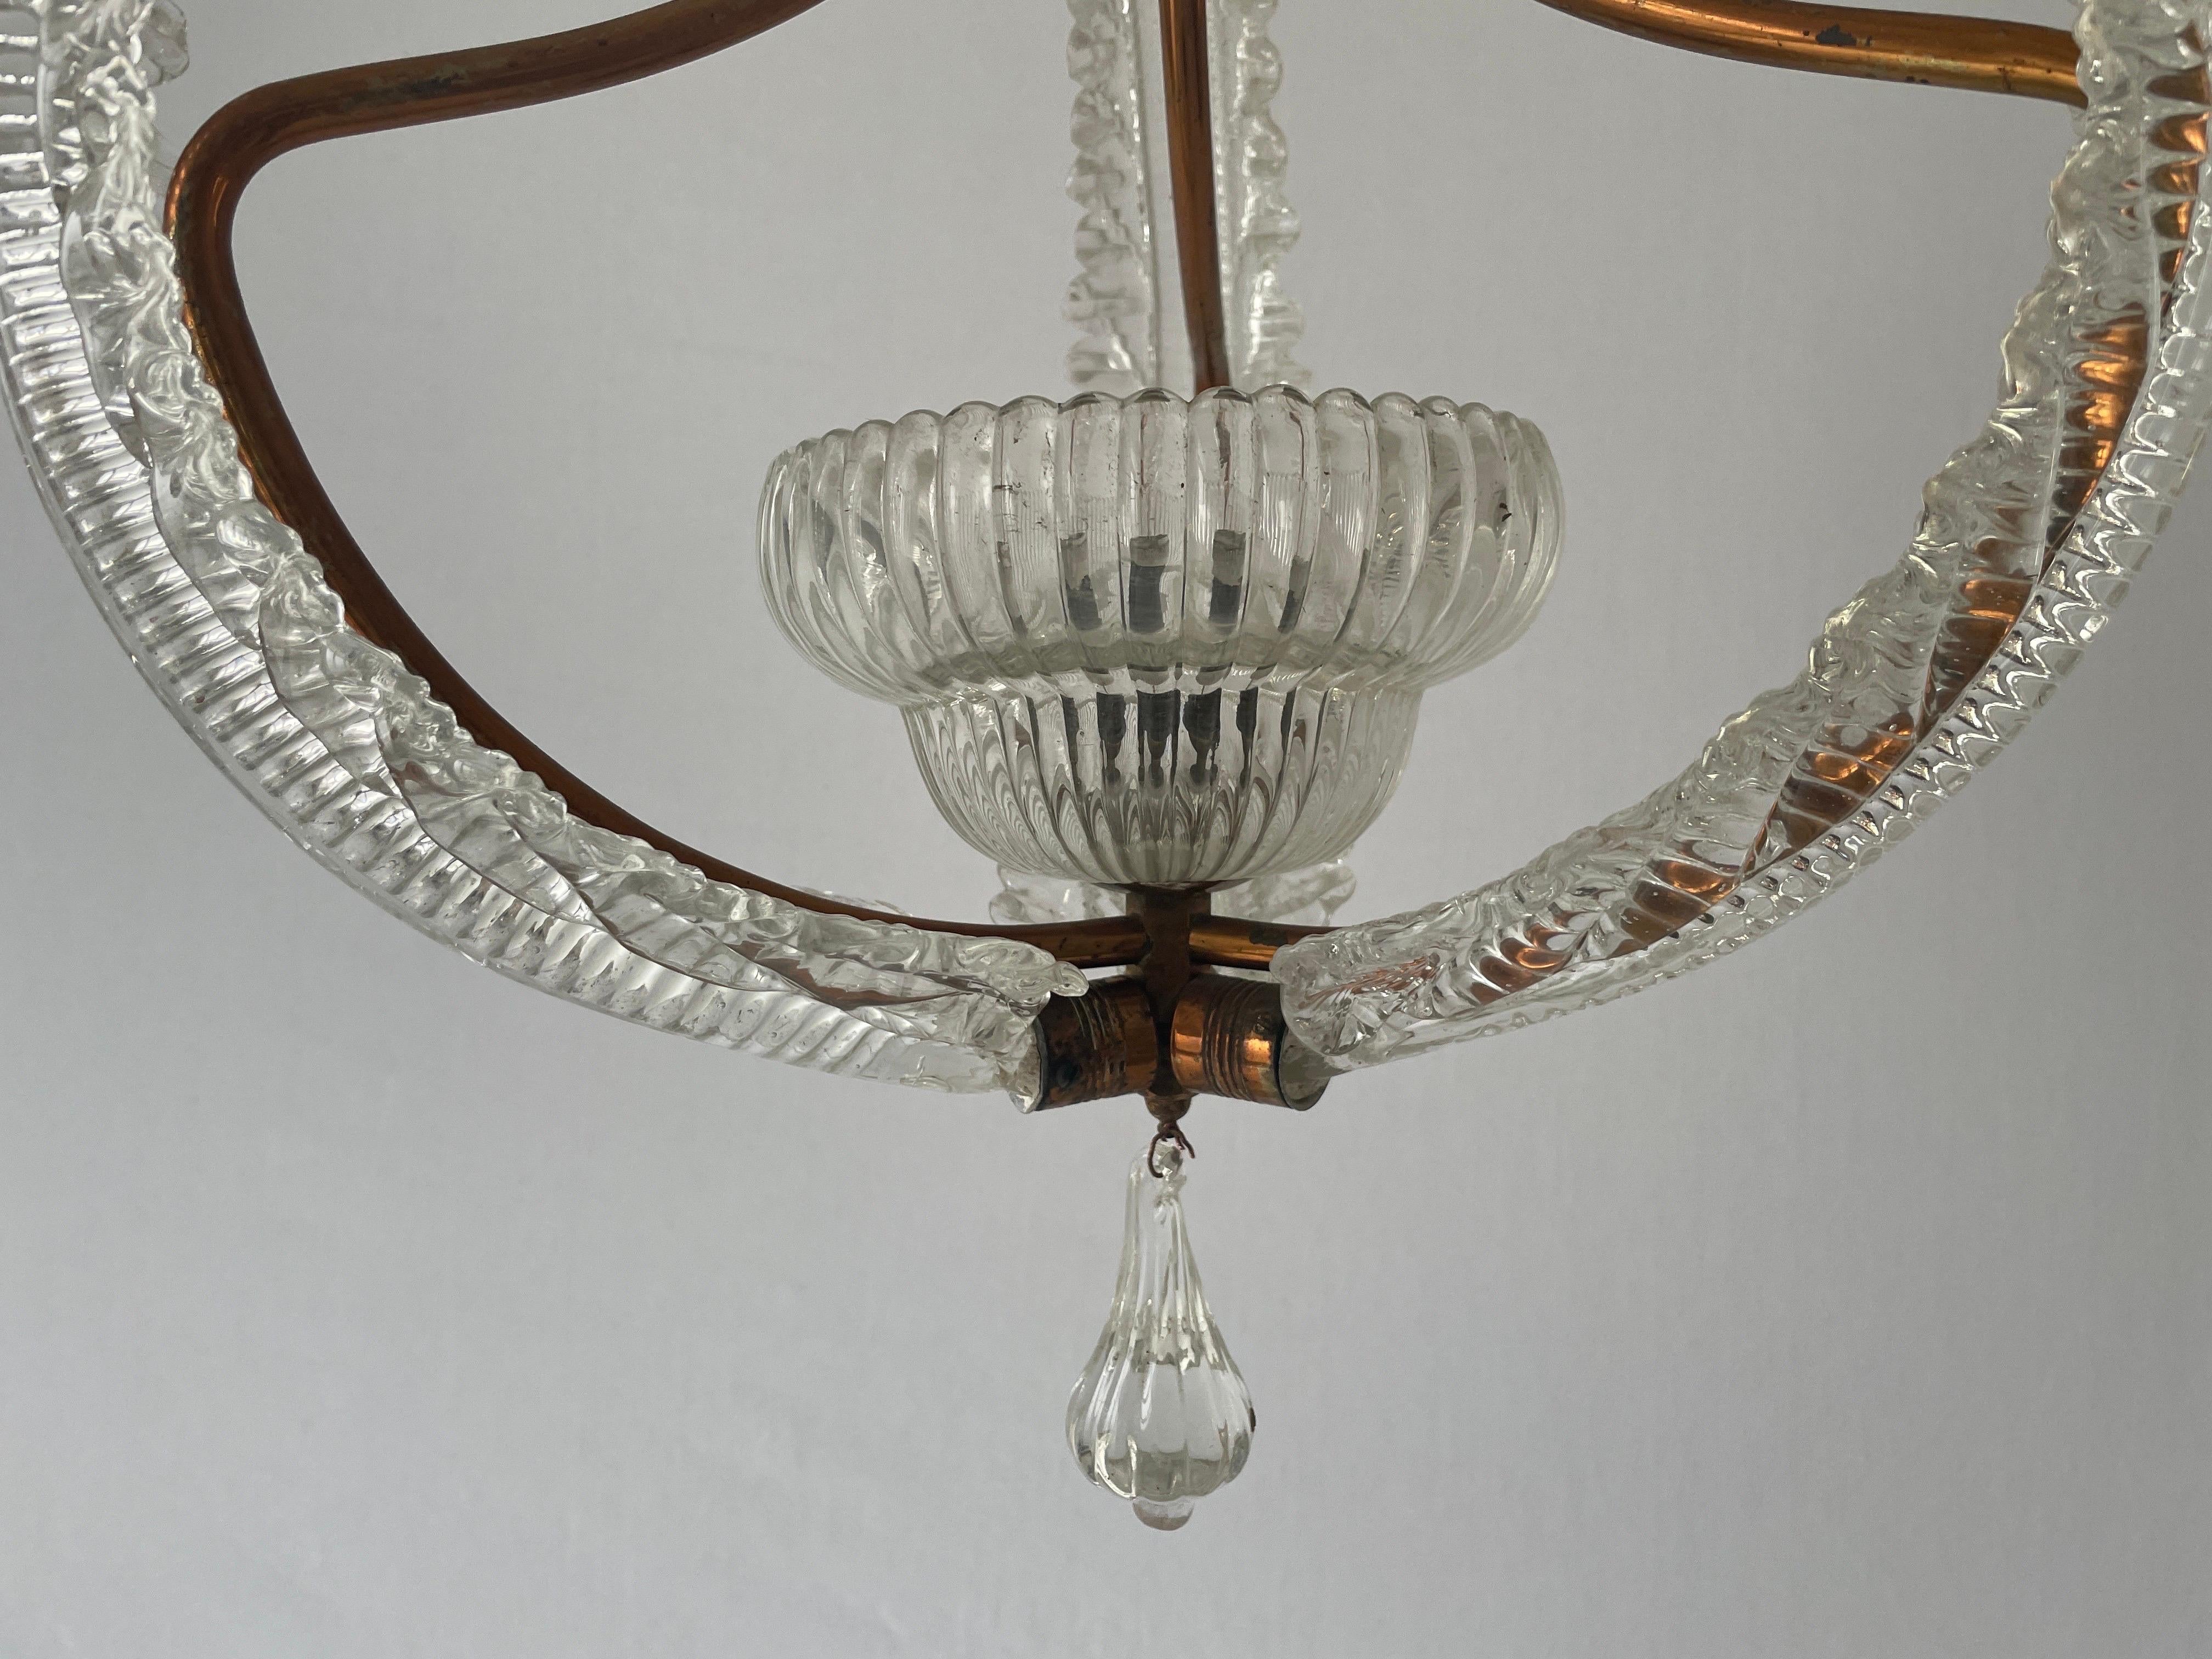 Italian Murano Glass Chandelier by Barovier & Toso, 1940s, Italy For Sale